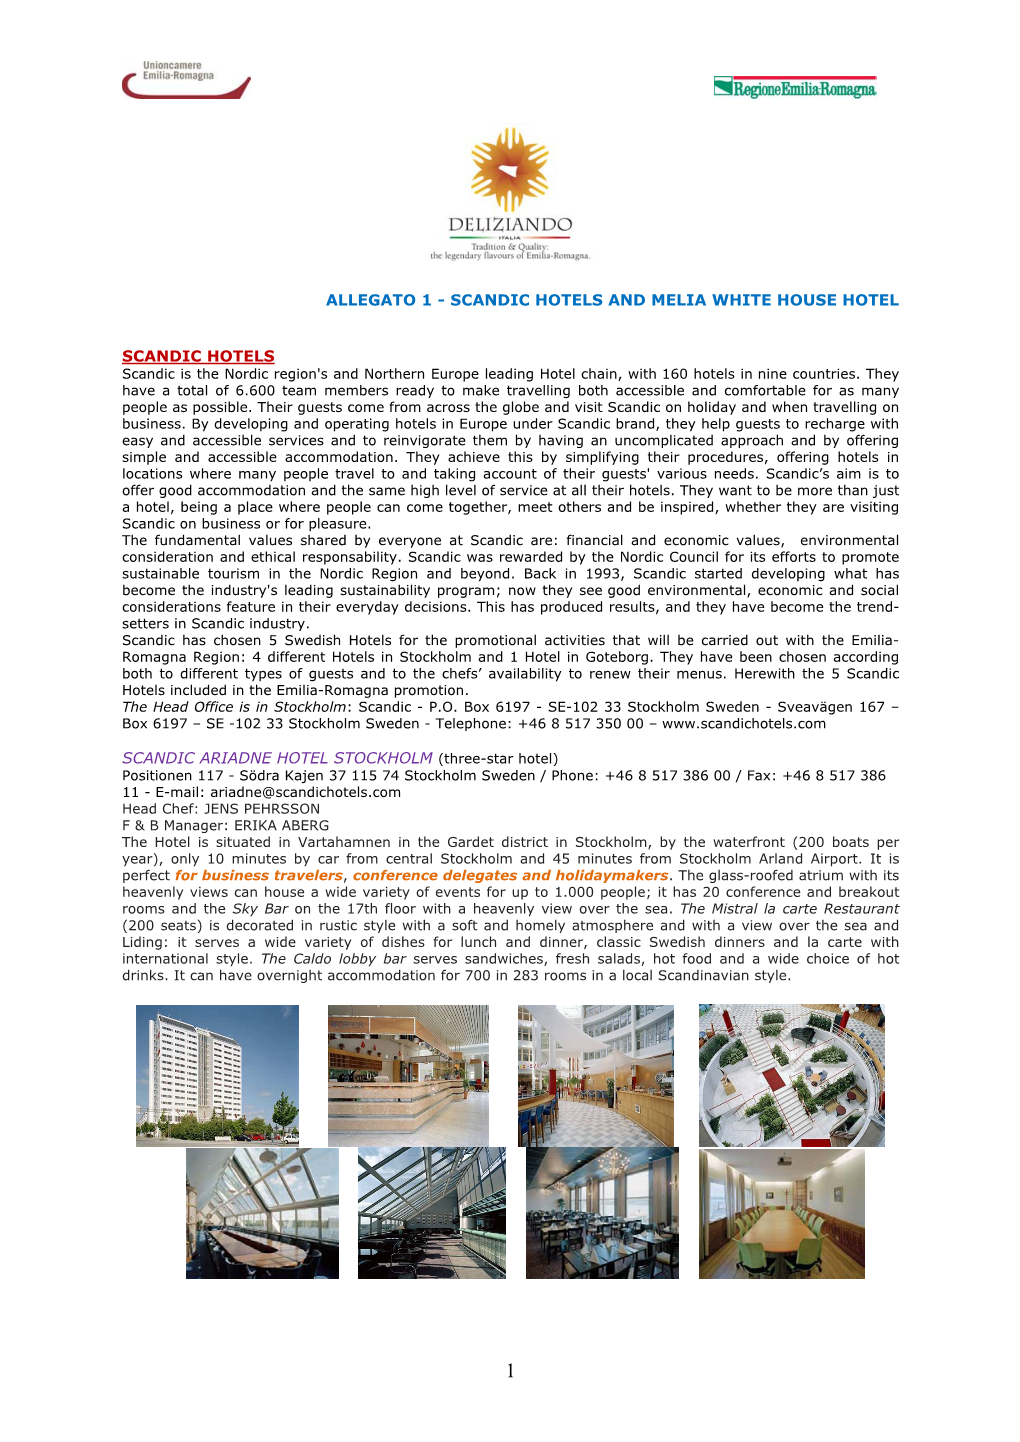 Allegato 1 - Scandic Hotels and Melia White House Hotel